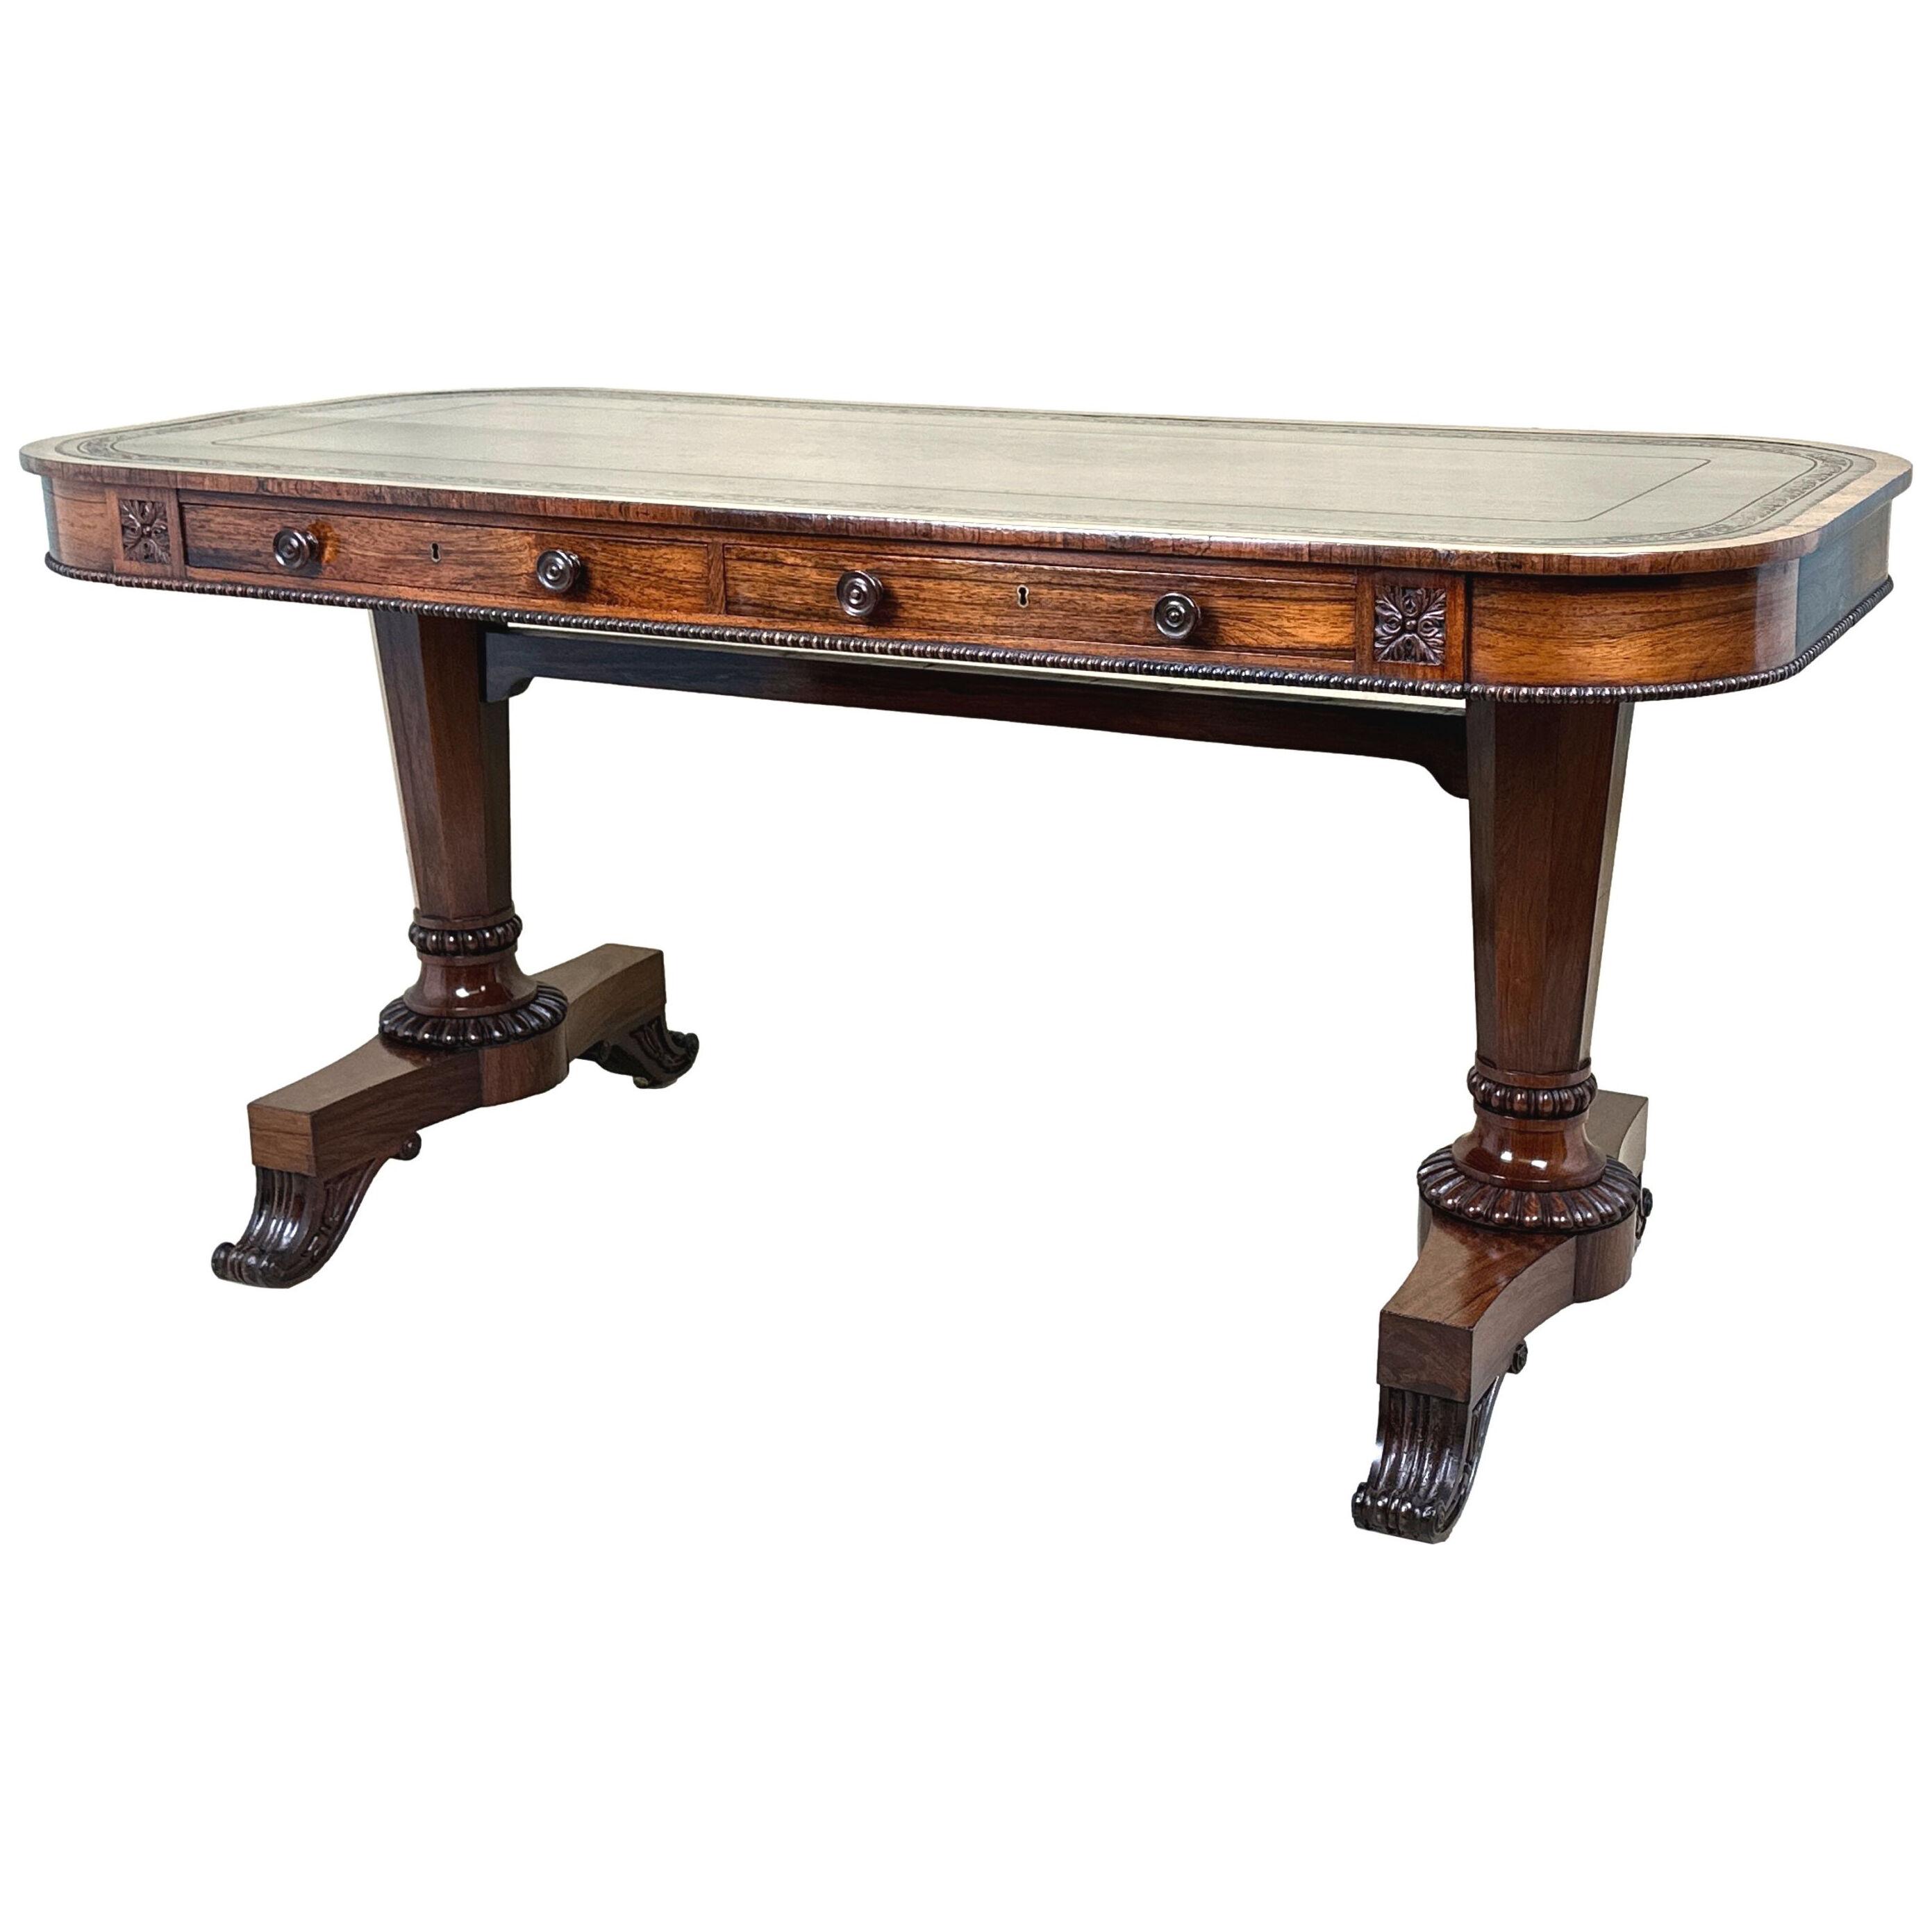 Rosewood 19th Century Writing Table